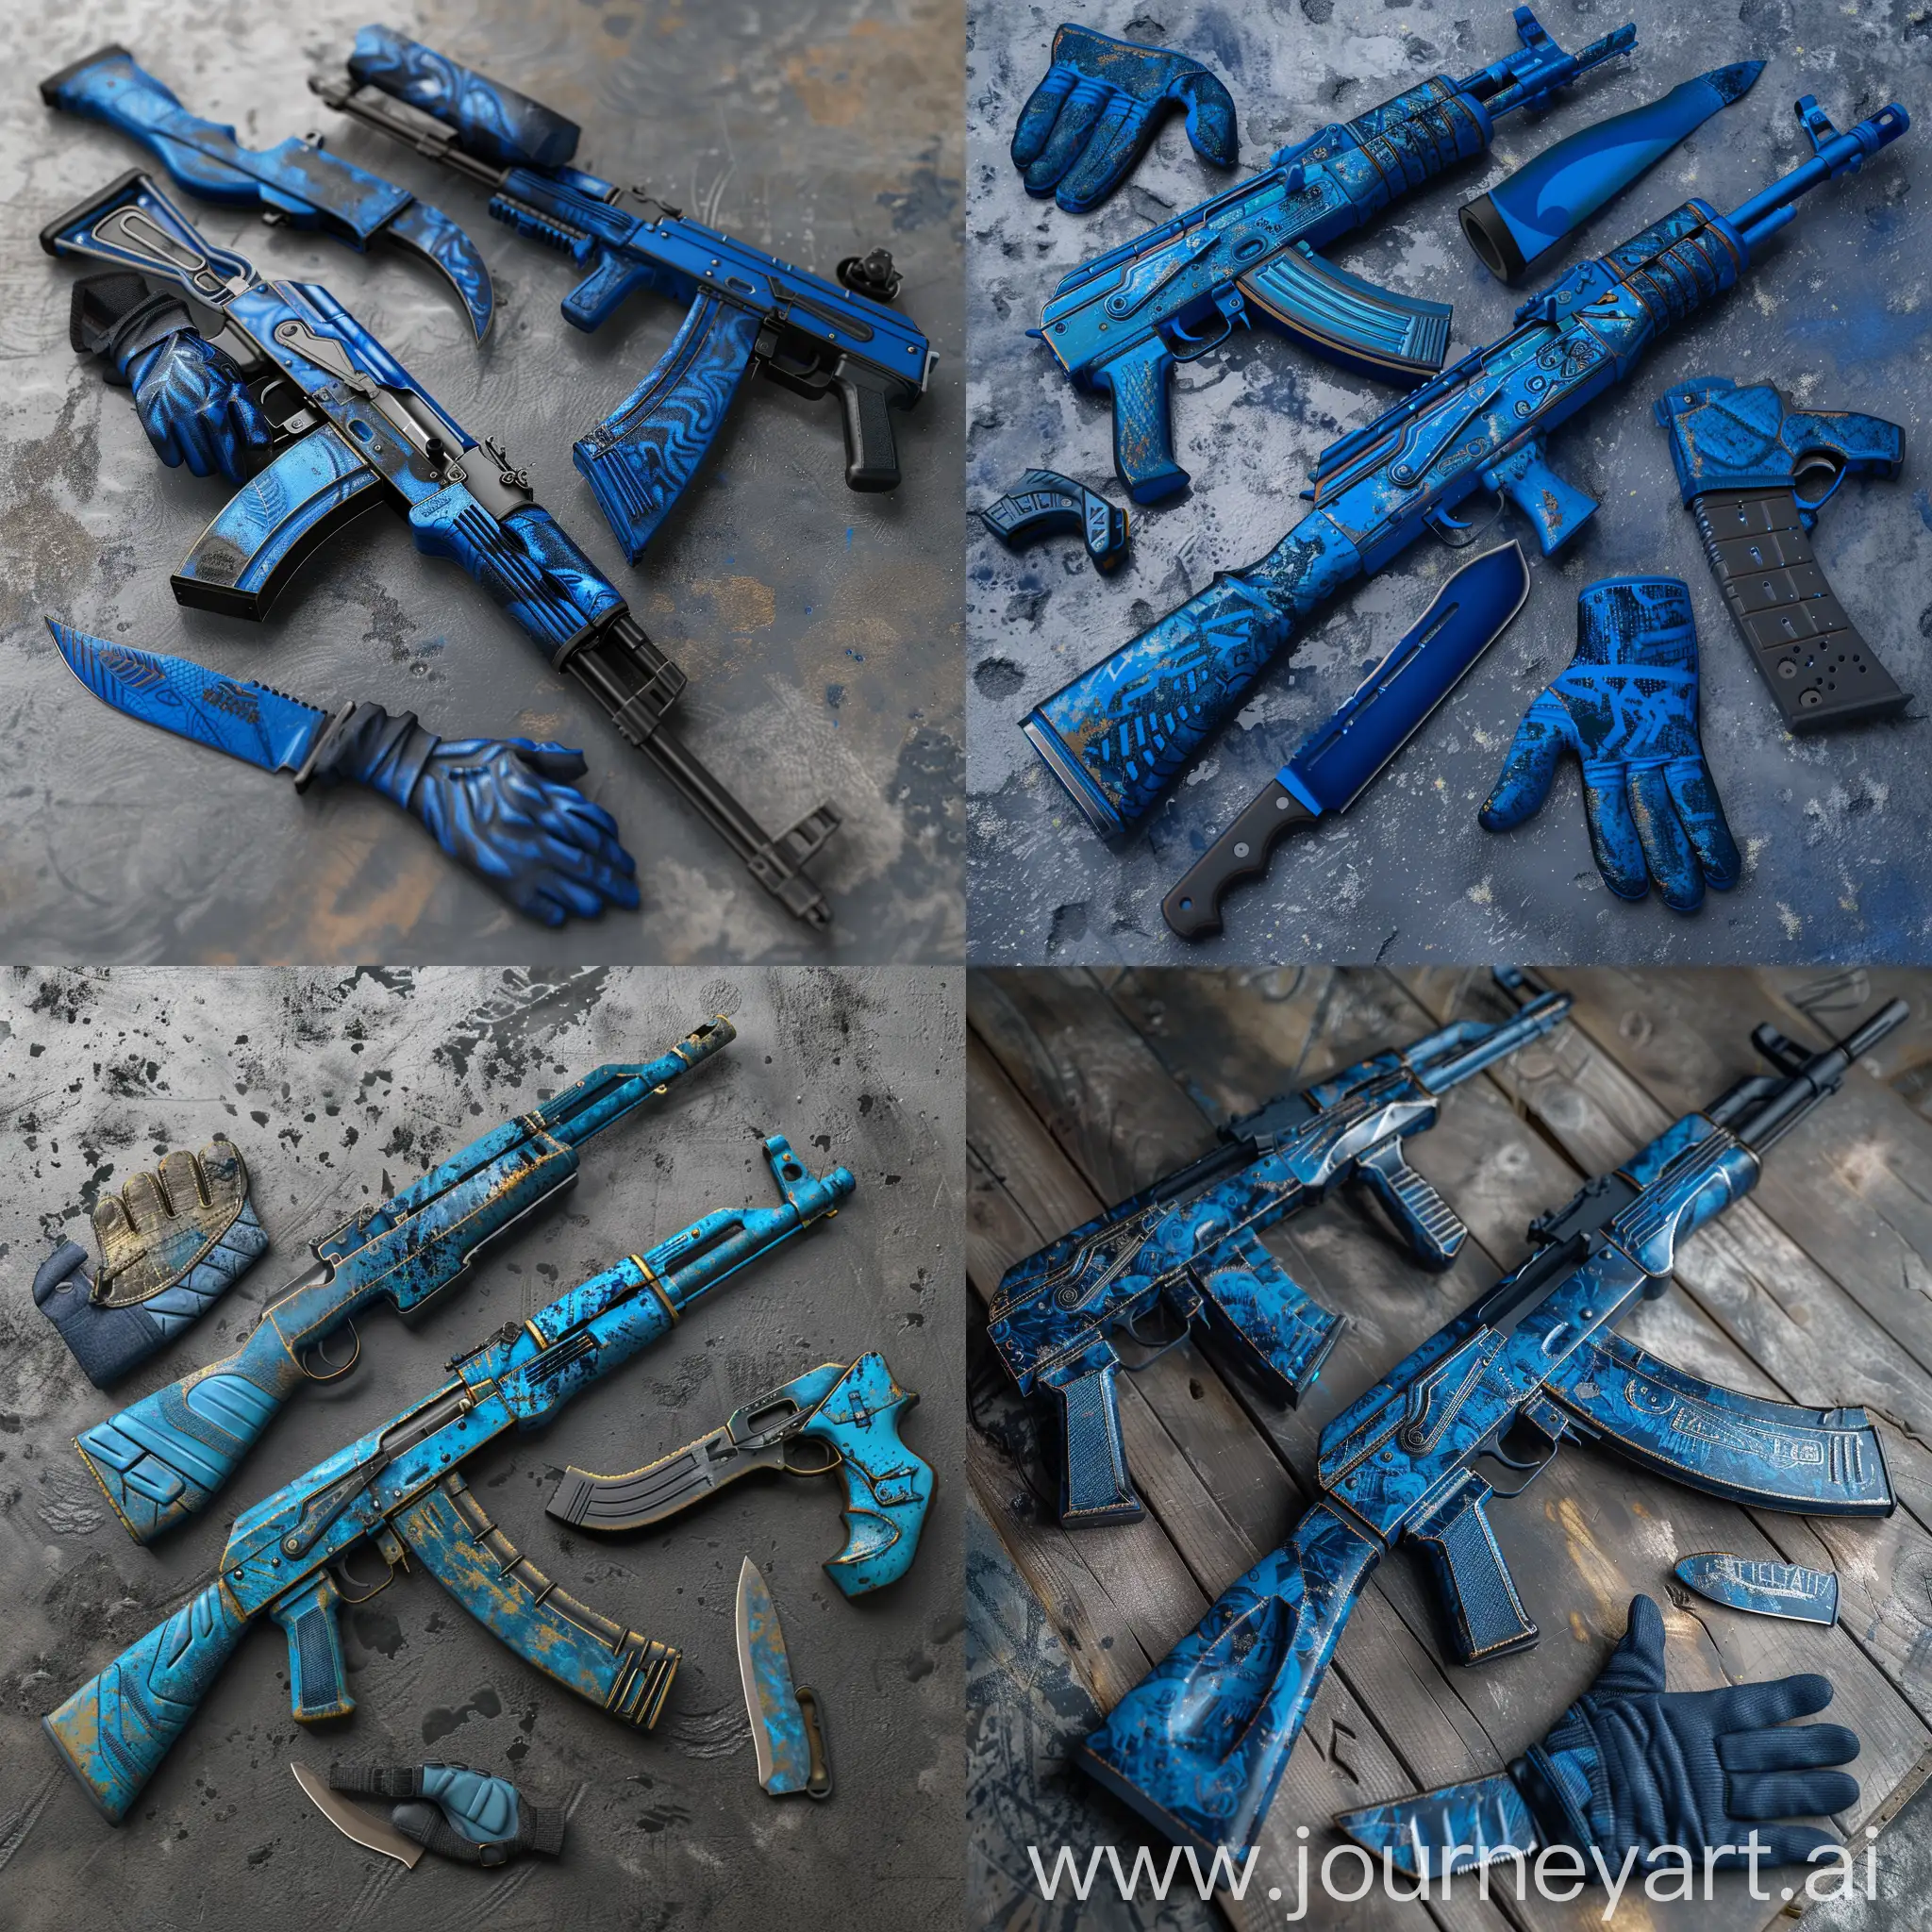 In the CS GO game, make perfect skins for AK 47, deagle, knife and glove weapons that look like they are in the game, and the theme of the skins will be blue.